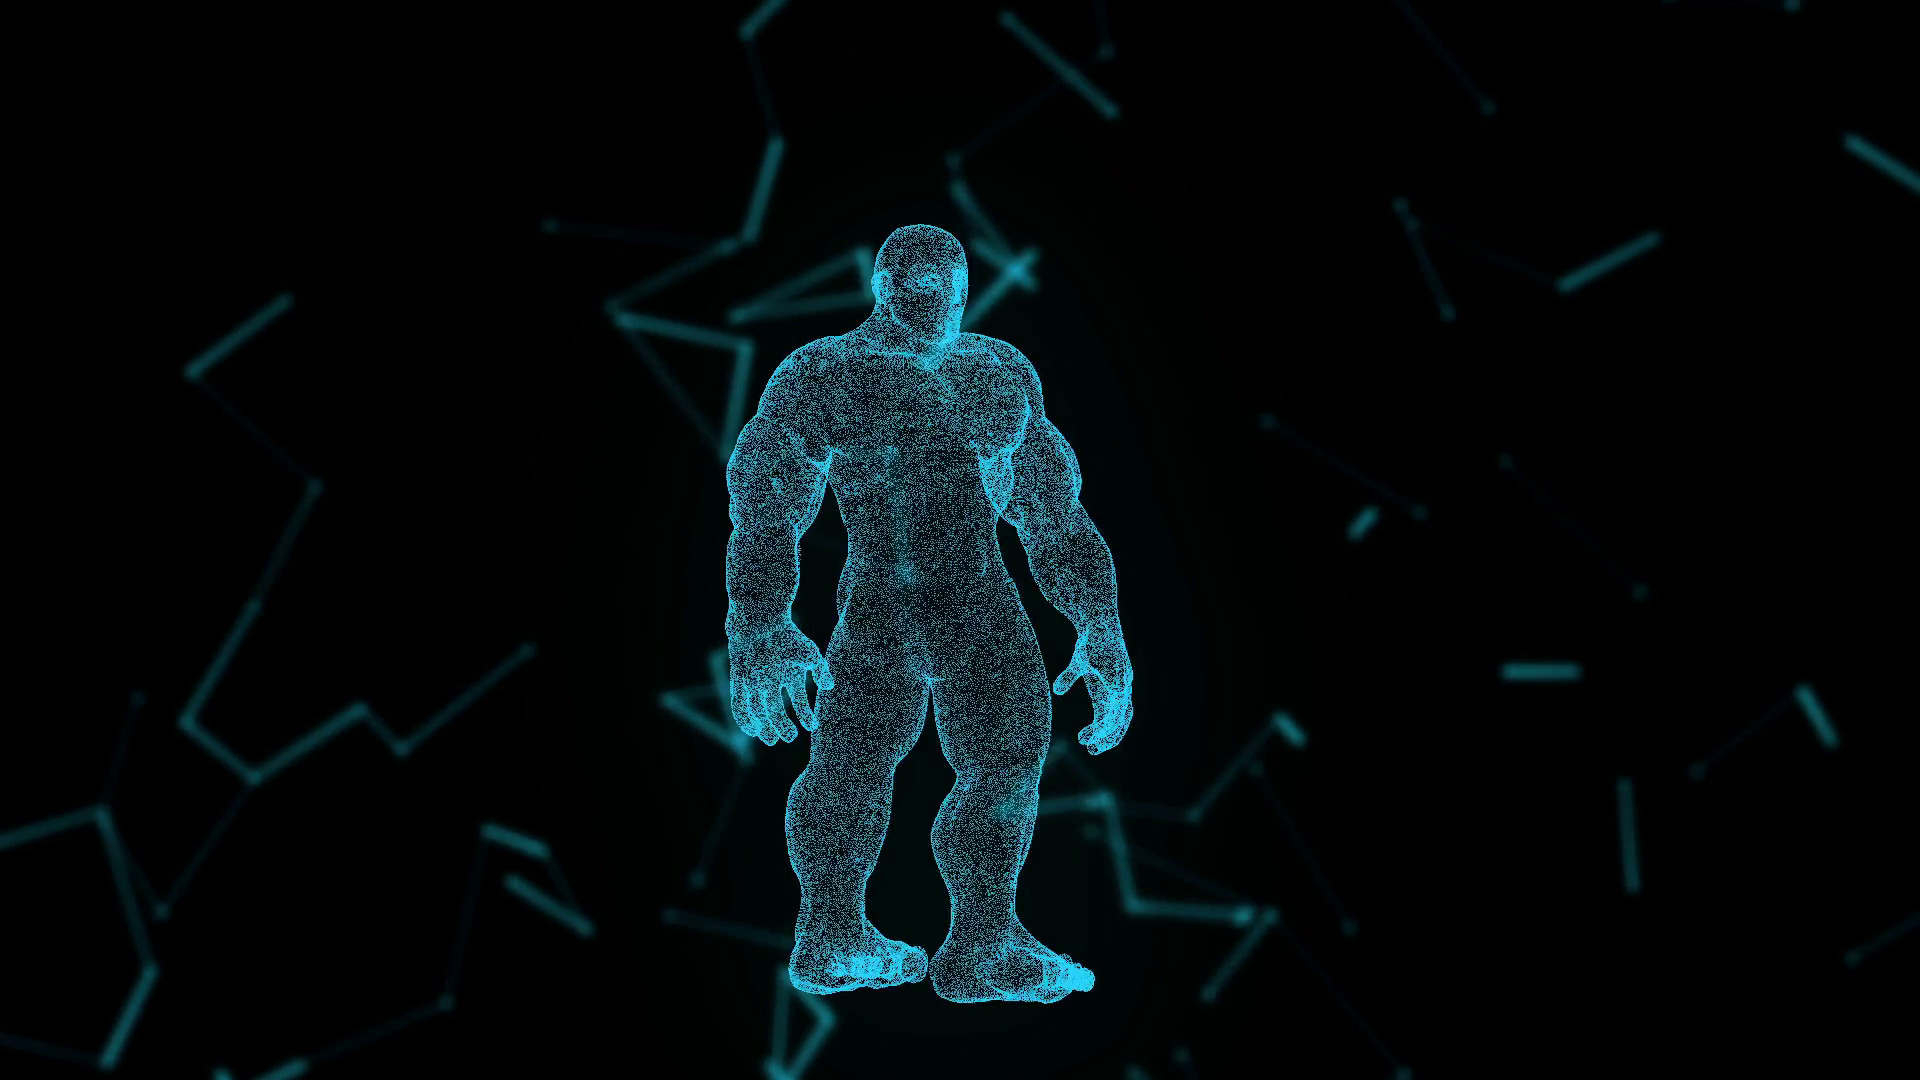 1920x1080, Human Avatar On Virtual 3d Holographic Projection - Darkness - HD Wallpaper 